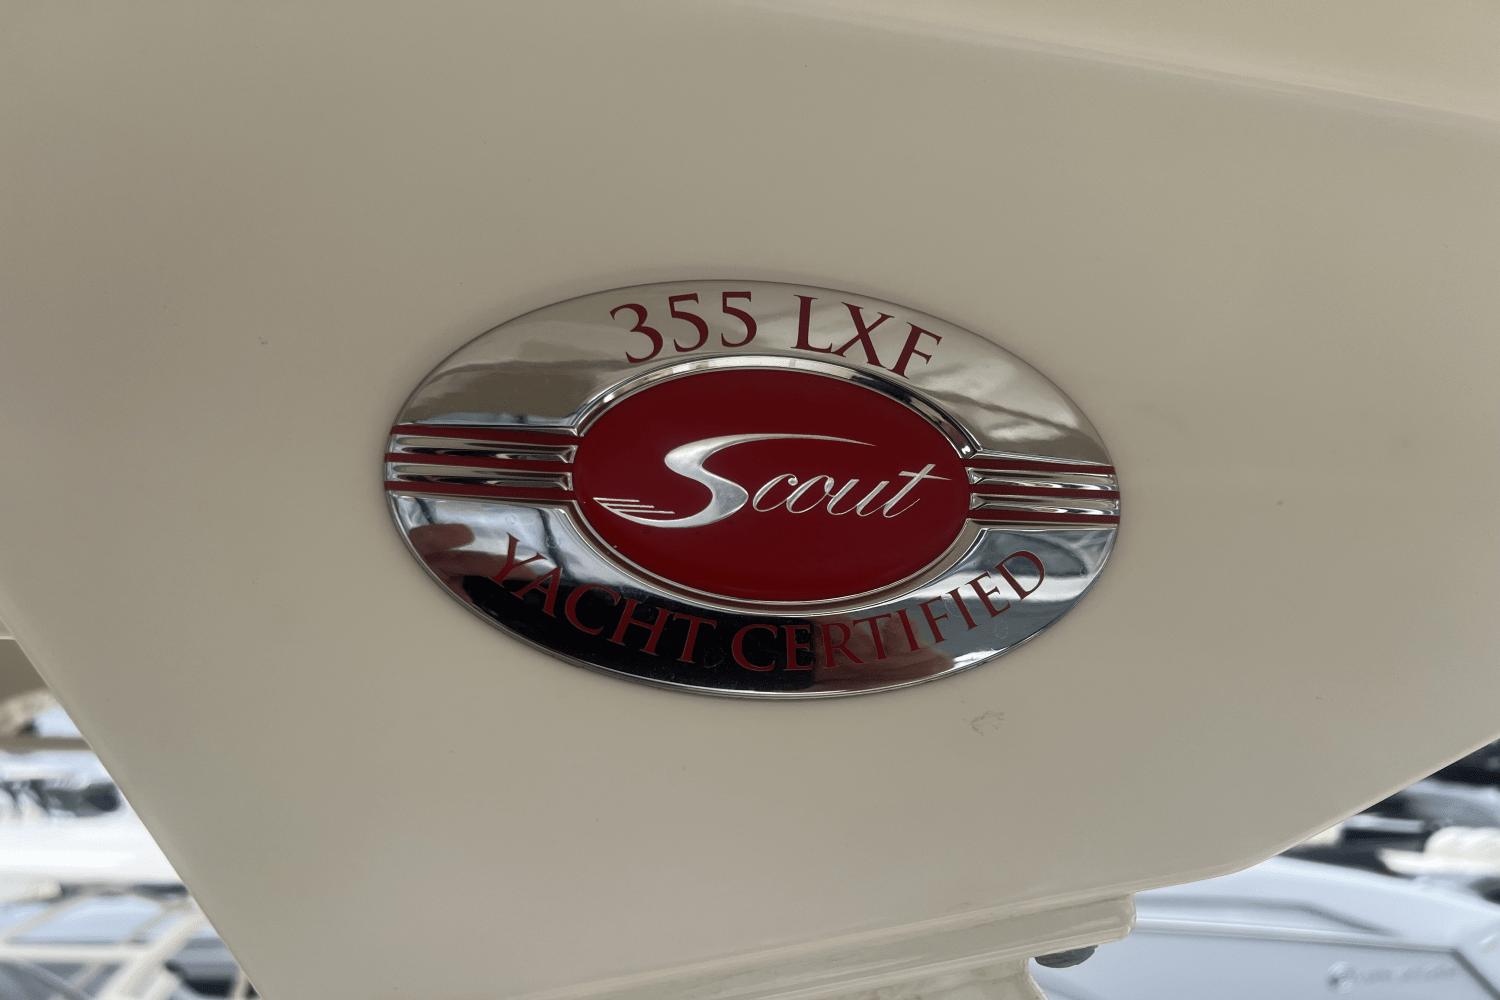 2018 Scout 355 LXF